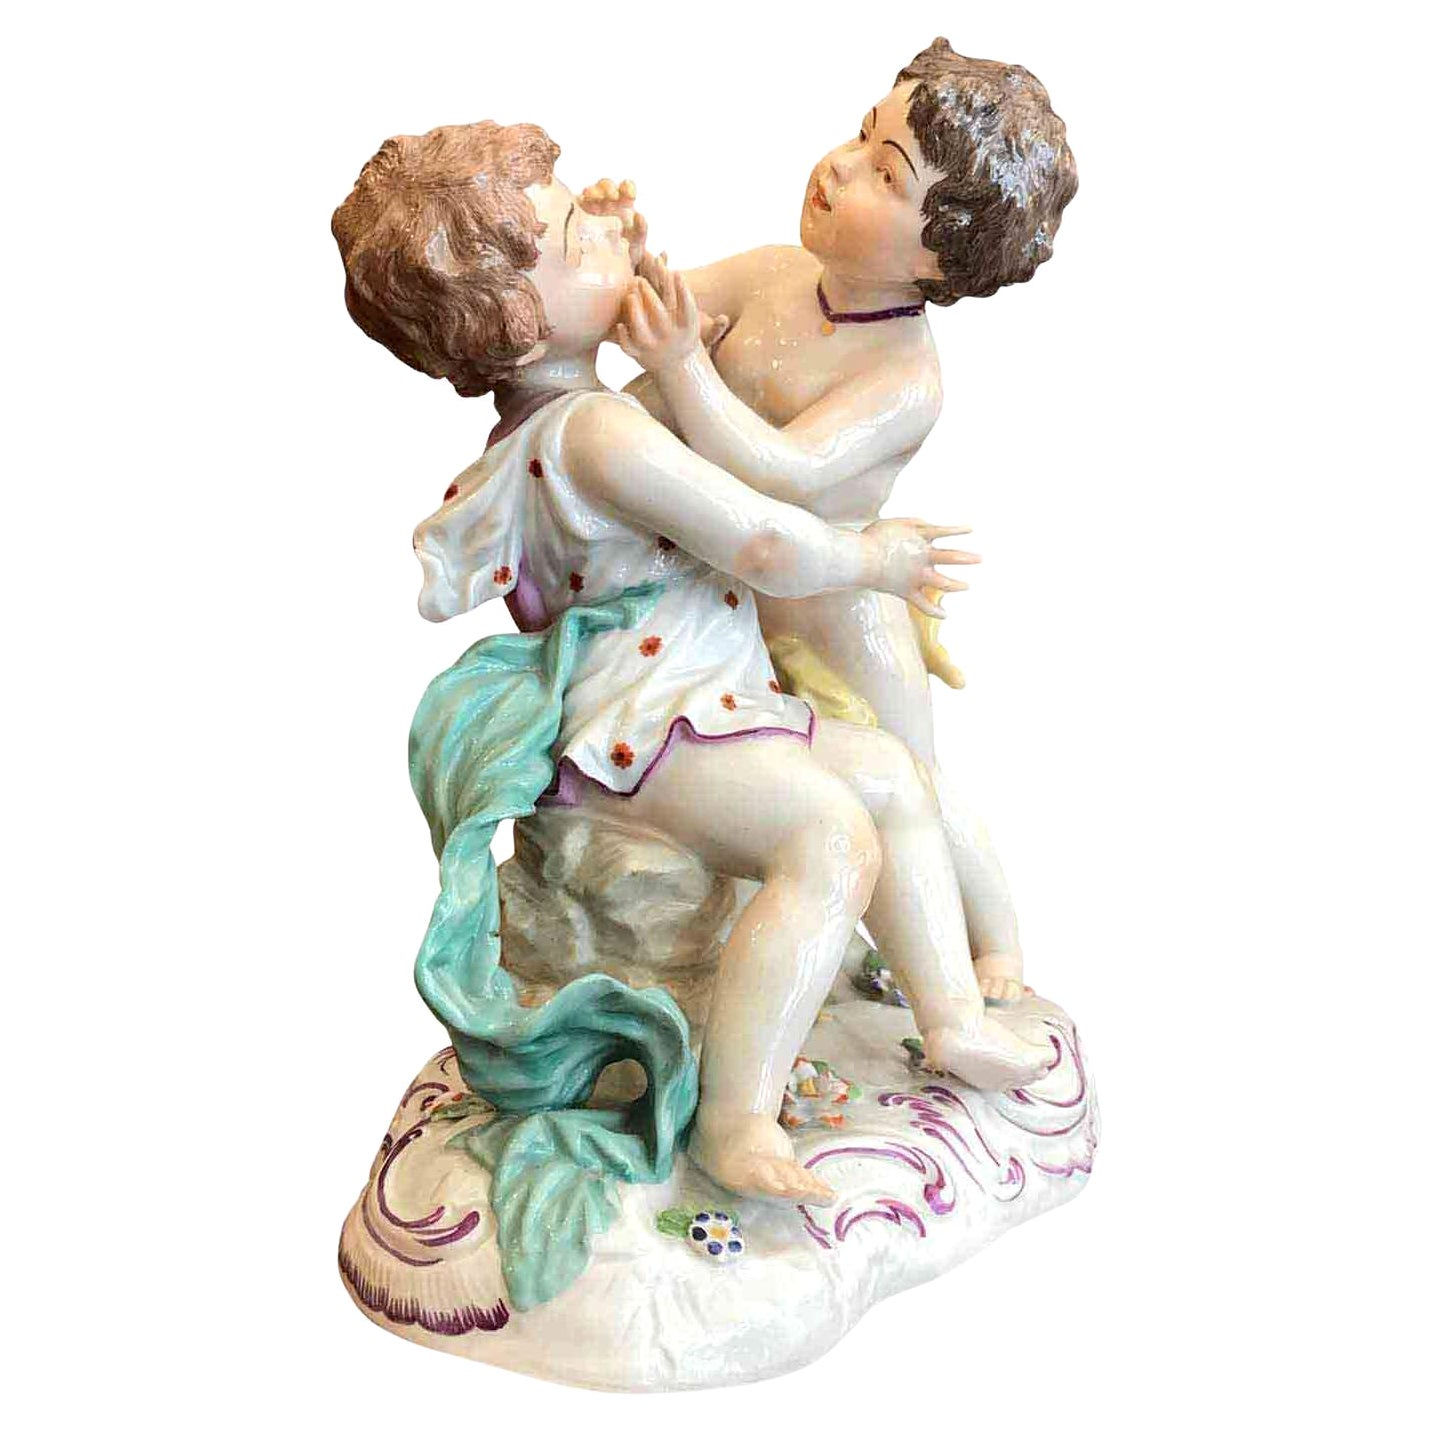 20th Century German Porcelain Group with Putti by Passau Manufacture For Sale